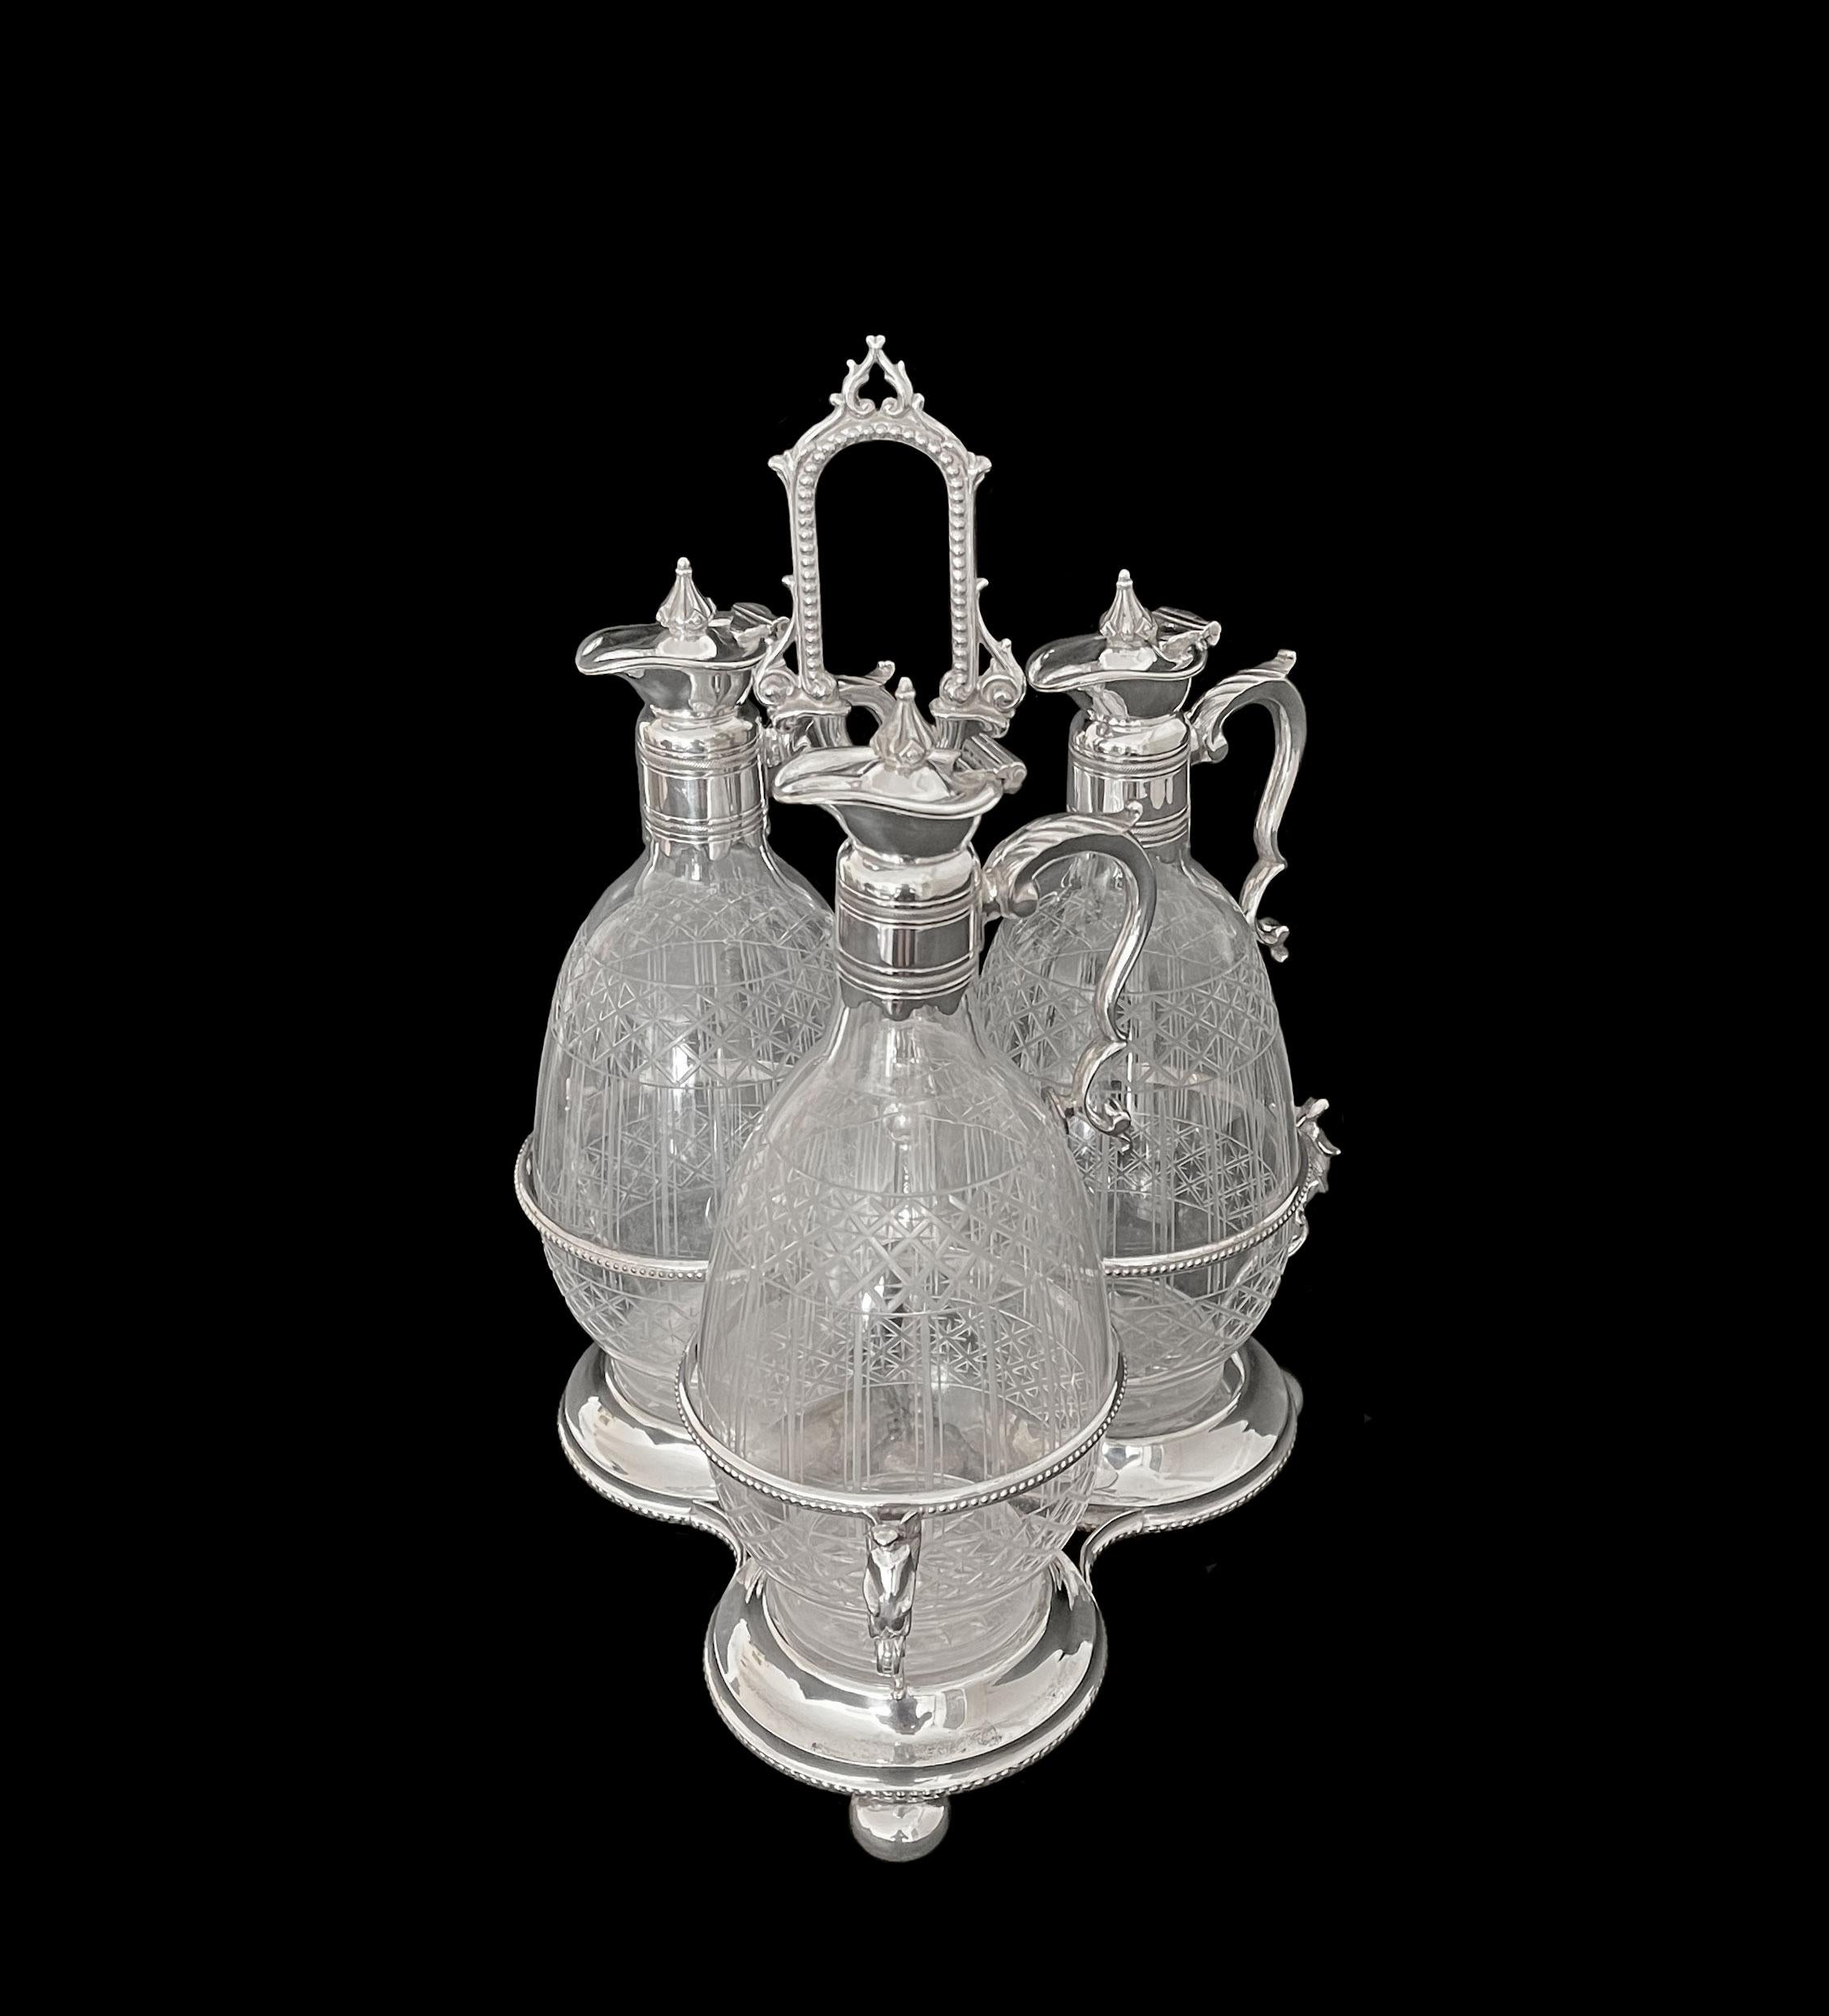 19th C. British cut crystal mounted silver plated cruet set. Three well detailed hand cut crystal jugs rest on a beautiful silver plated stand. British silver plate hallmark underneath the stand.

Measures: H: 14”
D: 9”.